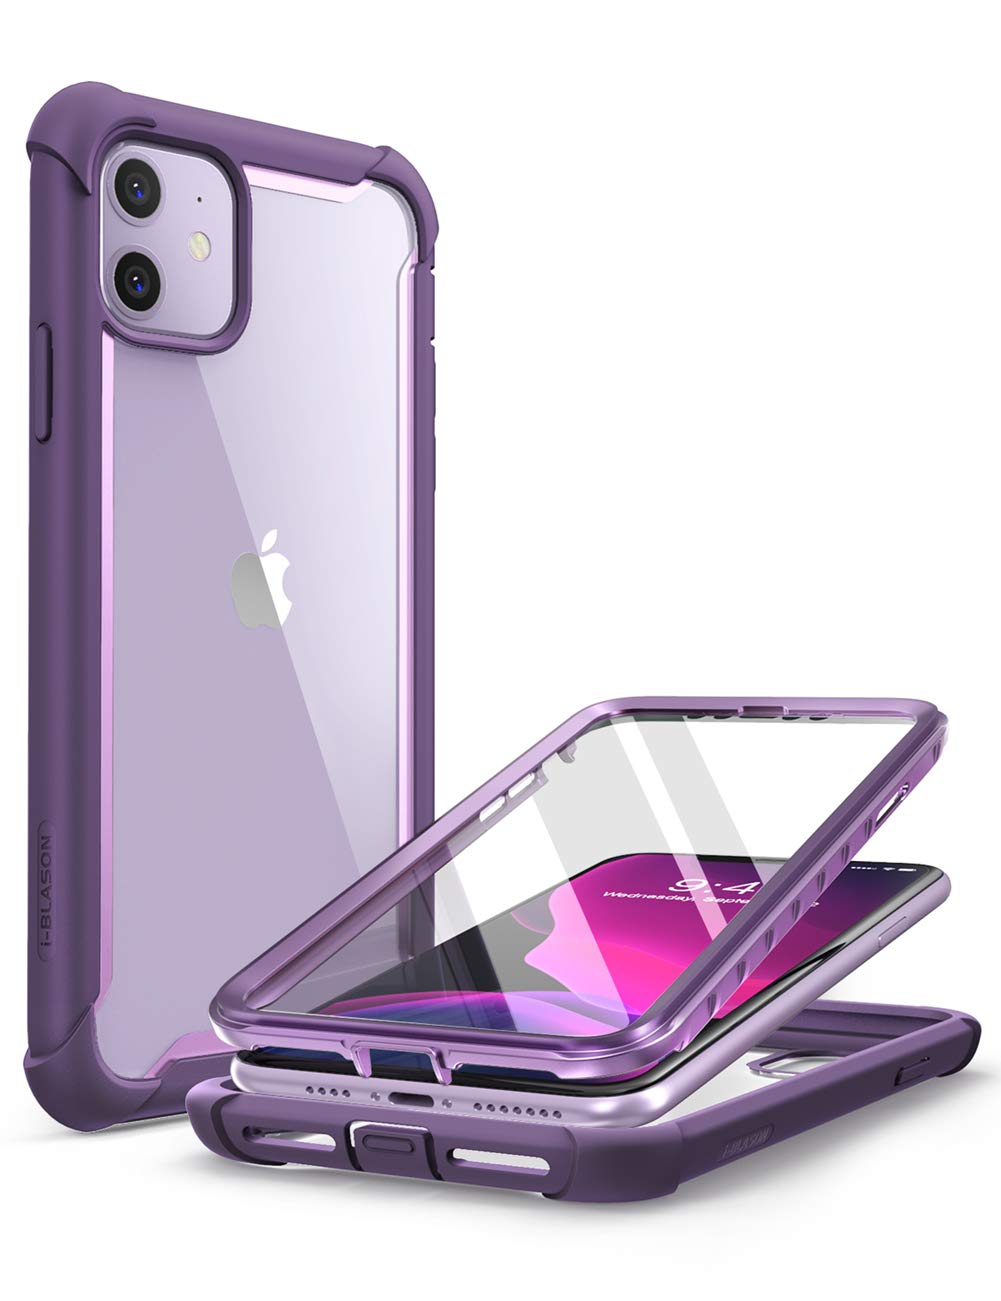 The best cases with a built-in screen protector for iPhone 11 and 